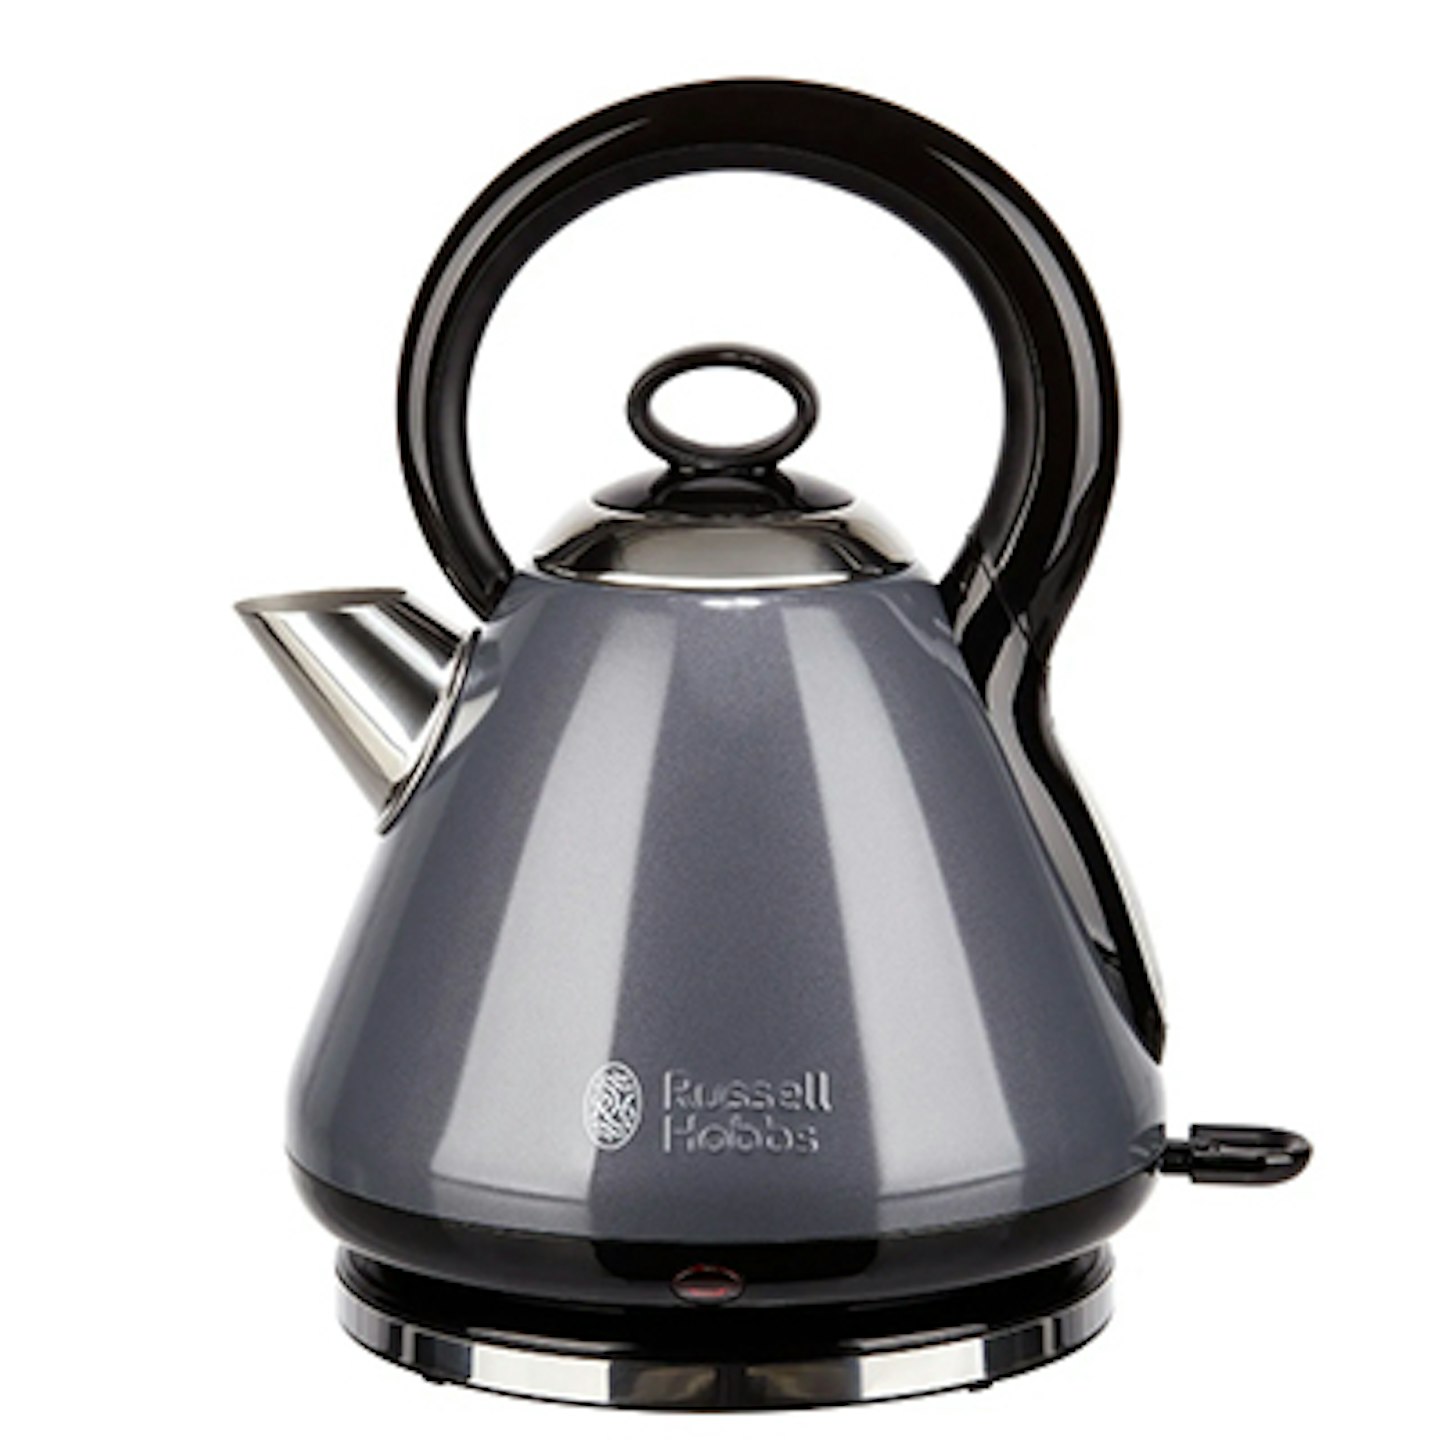 Russell hobbs traditional kettle